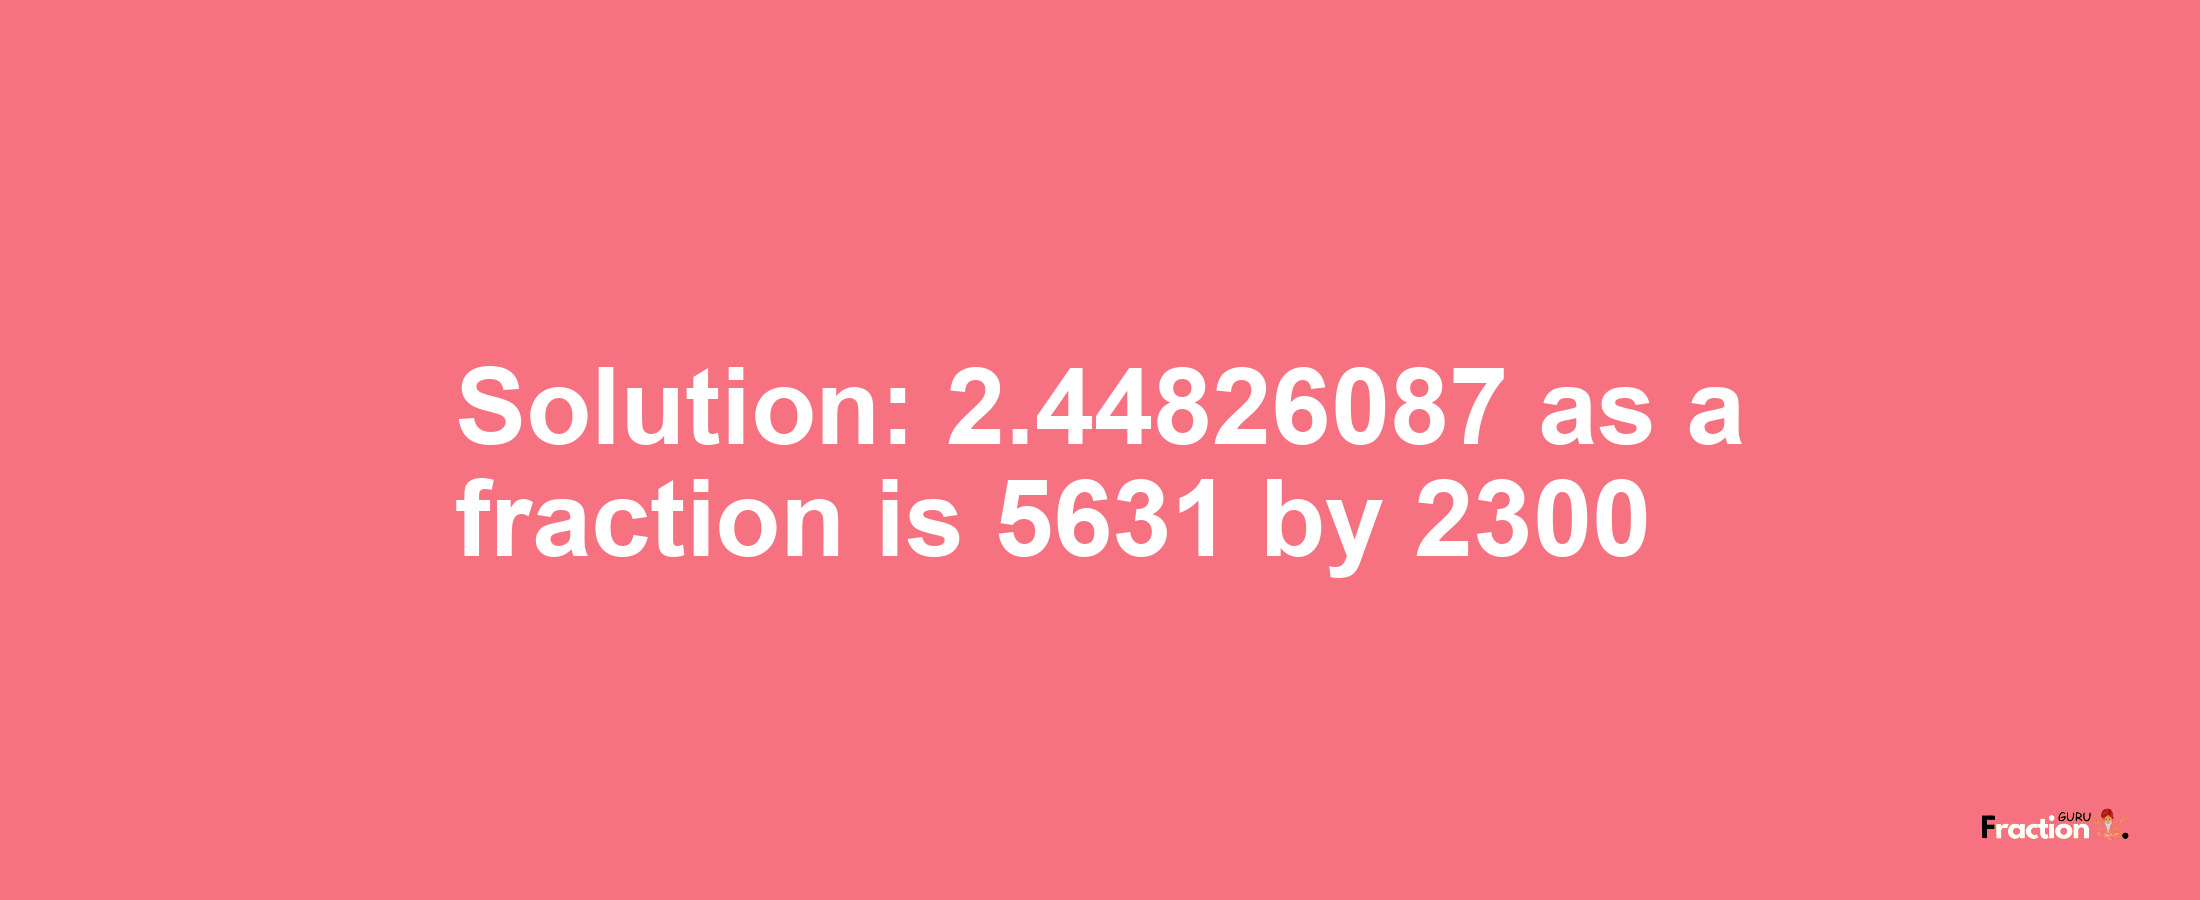 Solution:2.44826087 as a fraction is 5631/2300